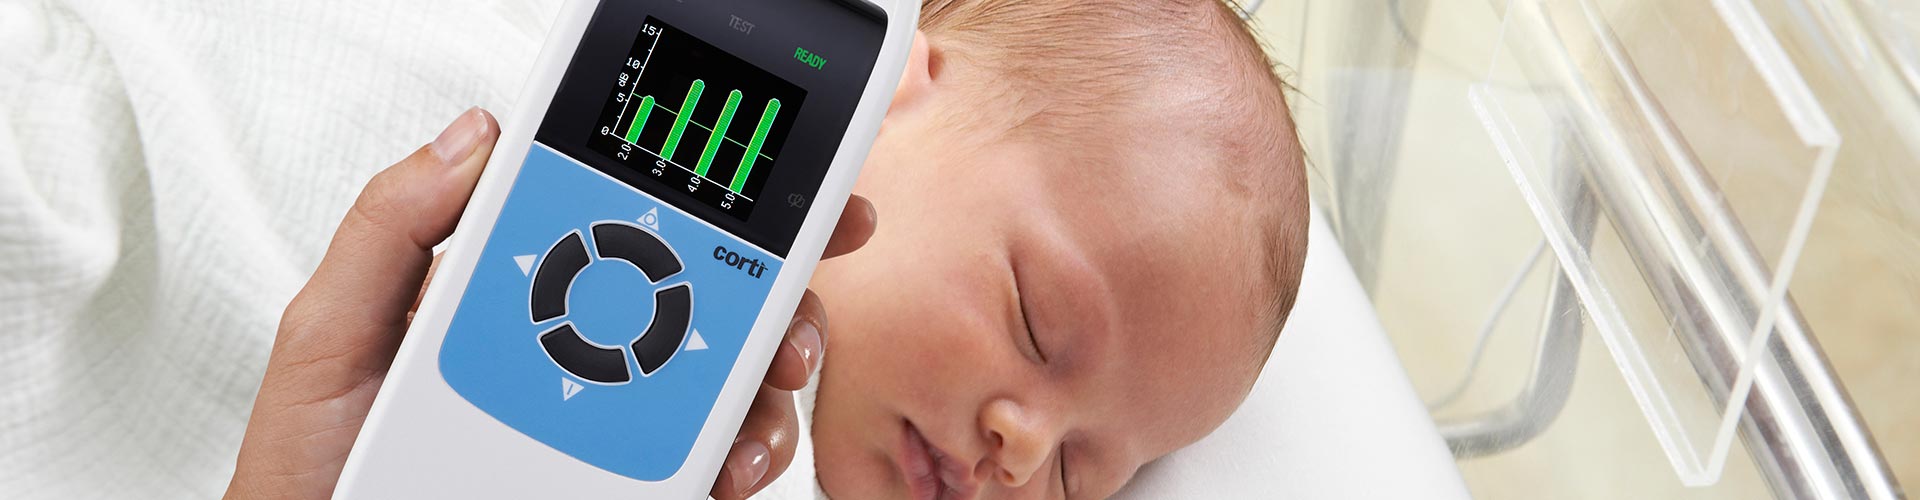 GSI Corti Otoacoustic Emissions Infant Testing